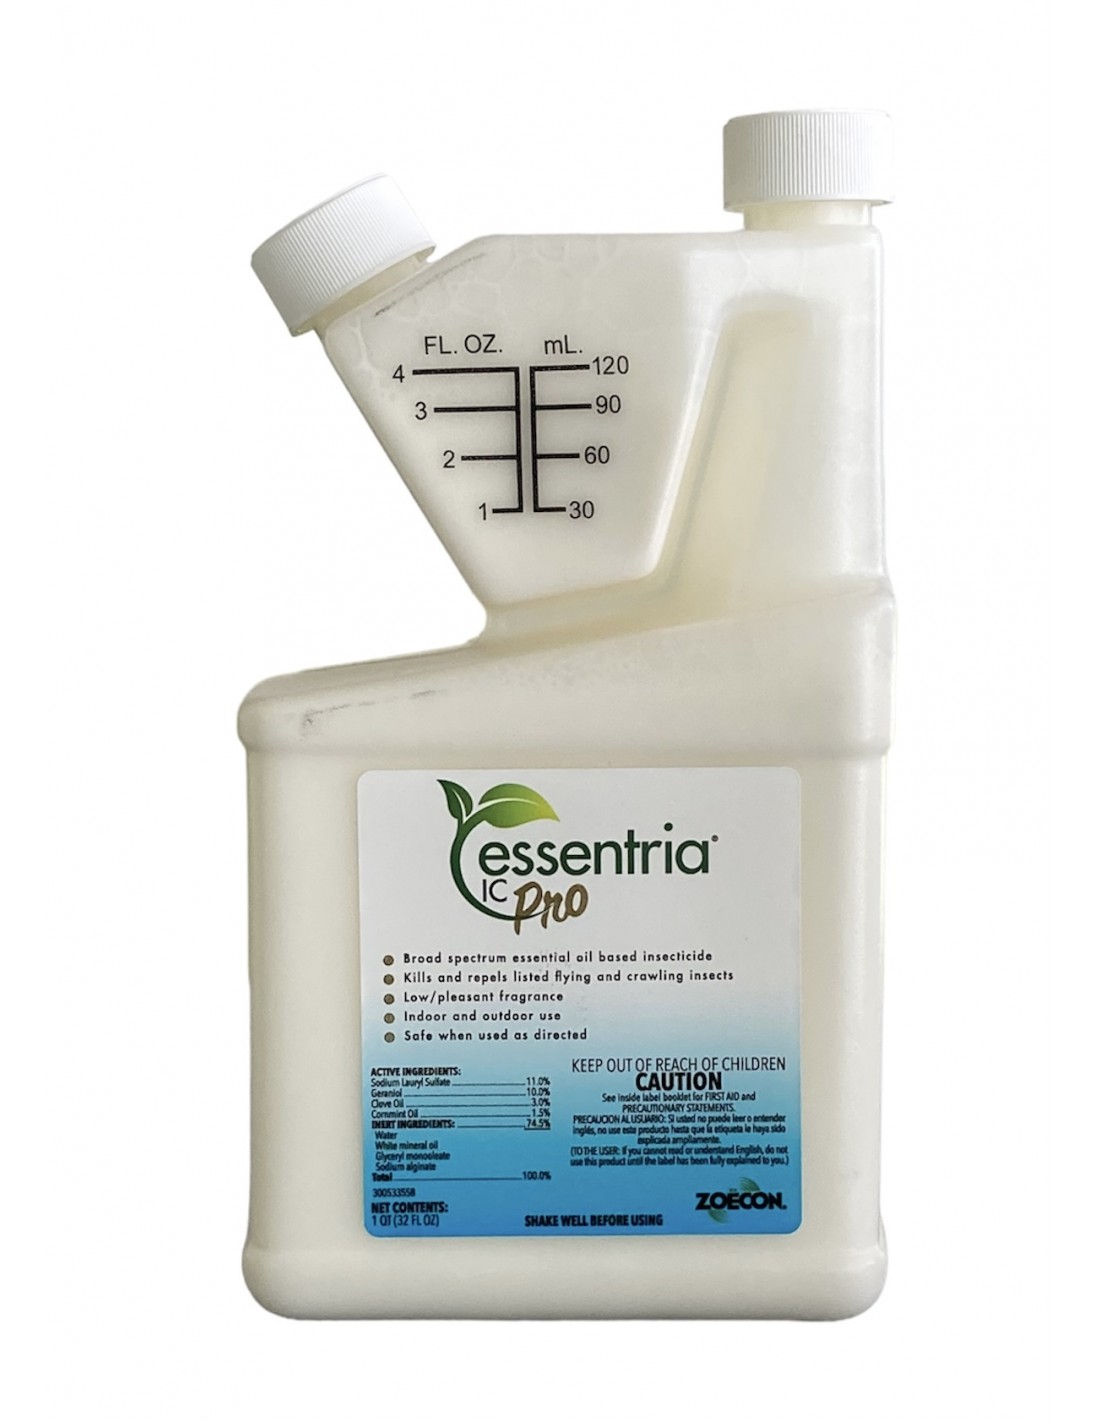 Essentria IC Pro Insecticide Concentrate 32 oz Questions & Answers